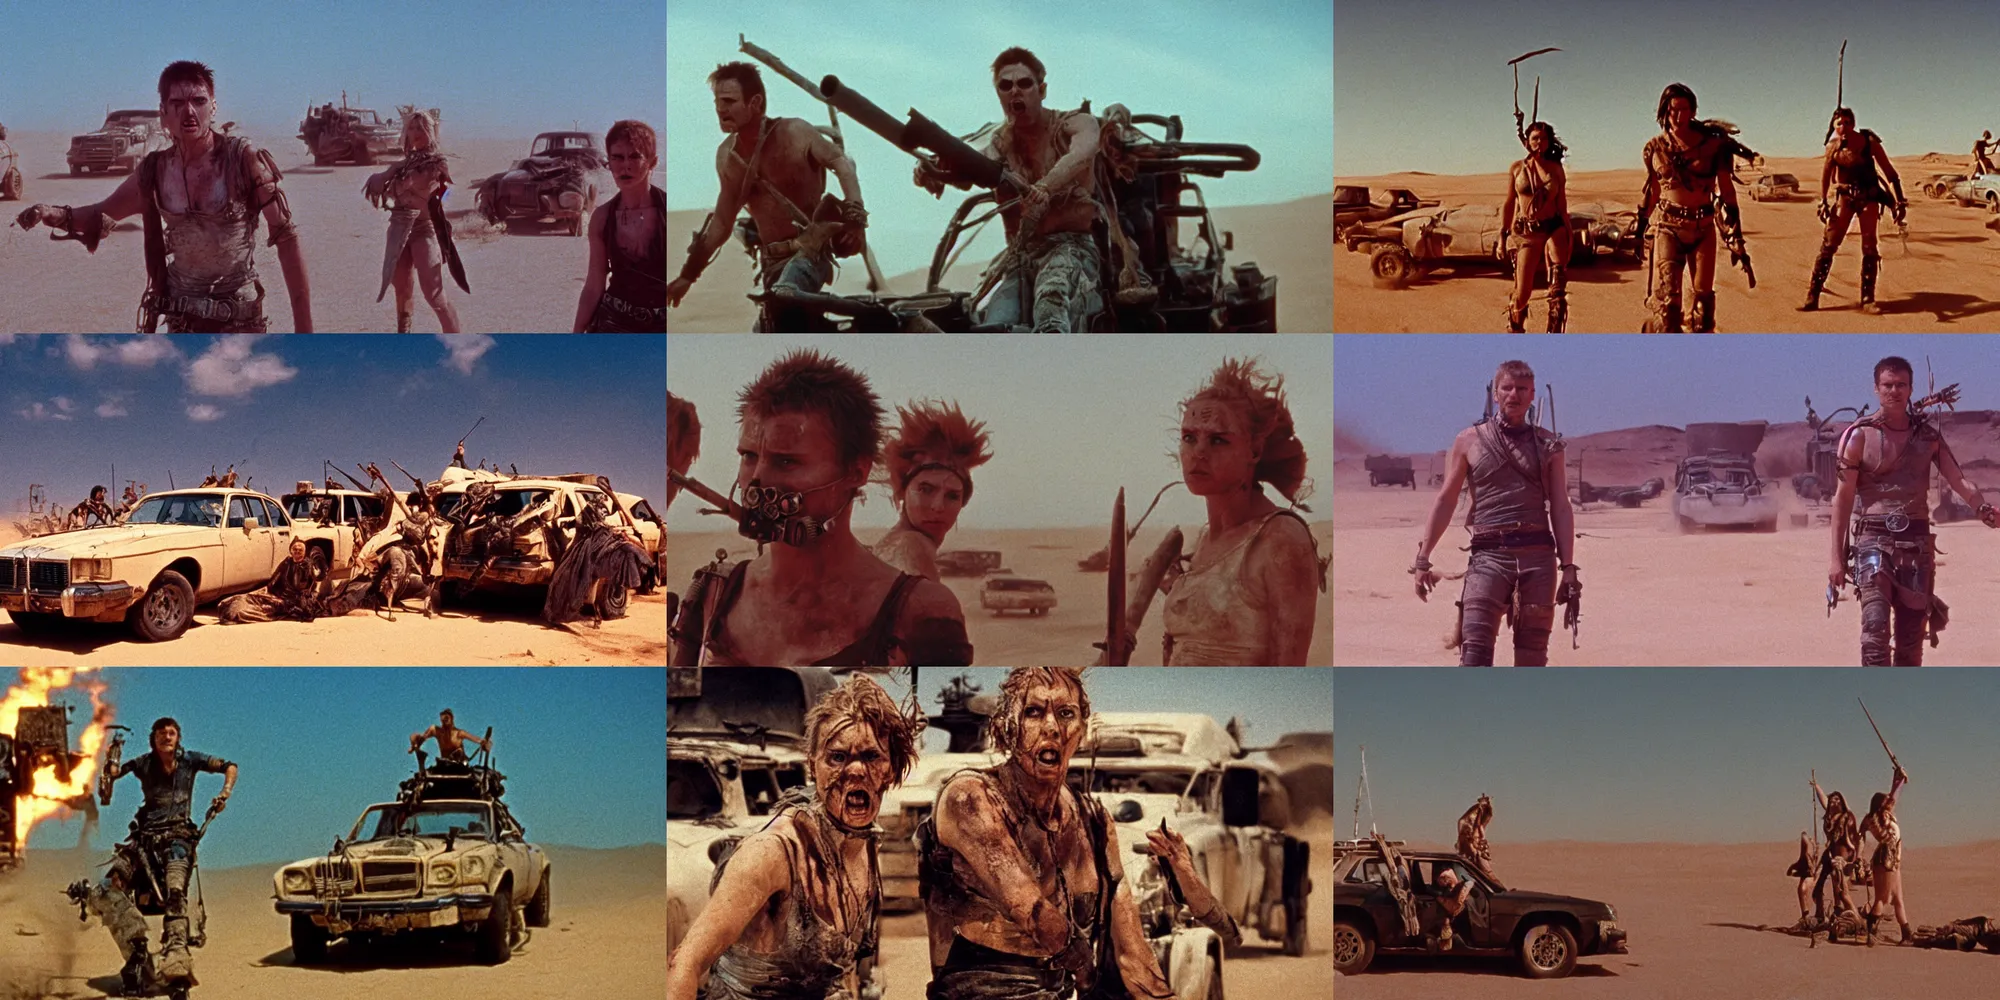 Prompt: mad max fury road directed by wes anderson, cinestill 8 0 0 t, 1 9 8 0 s movie still, film grain